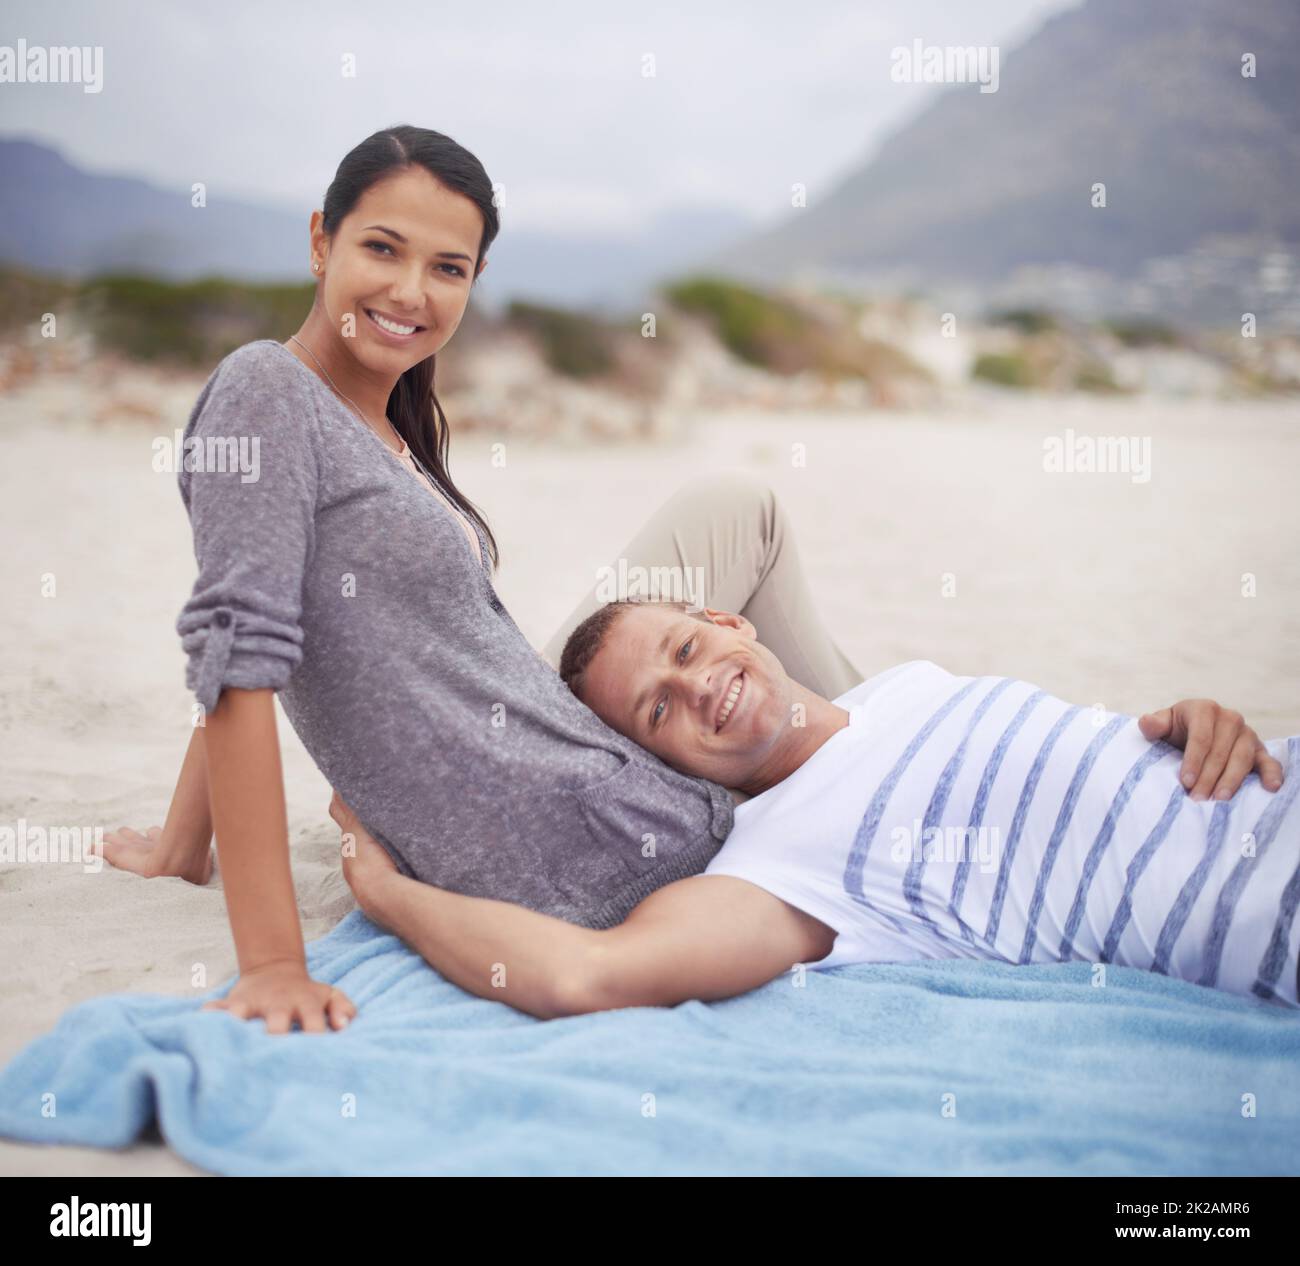 Me and my baby on the beach. Shot of a handsome young man lying on his girlfriends lap at the beach. Stock Photo